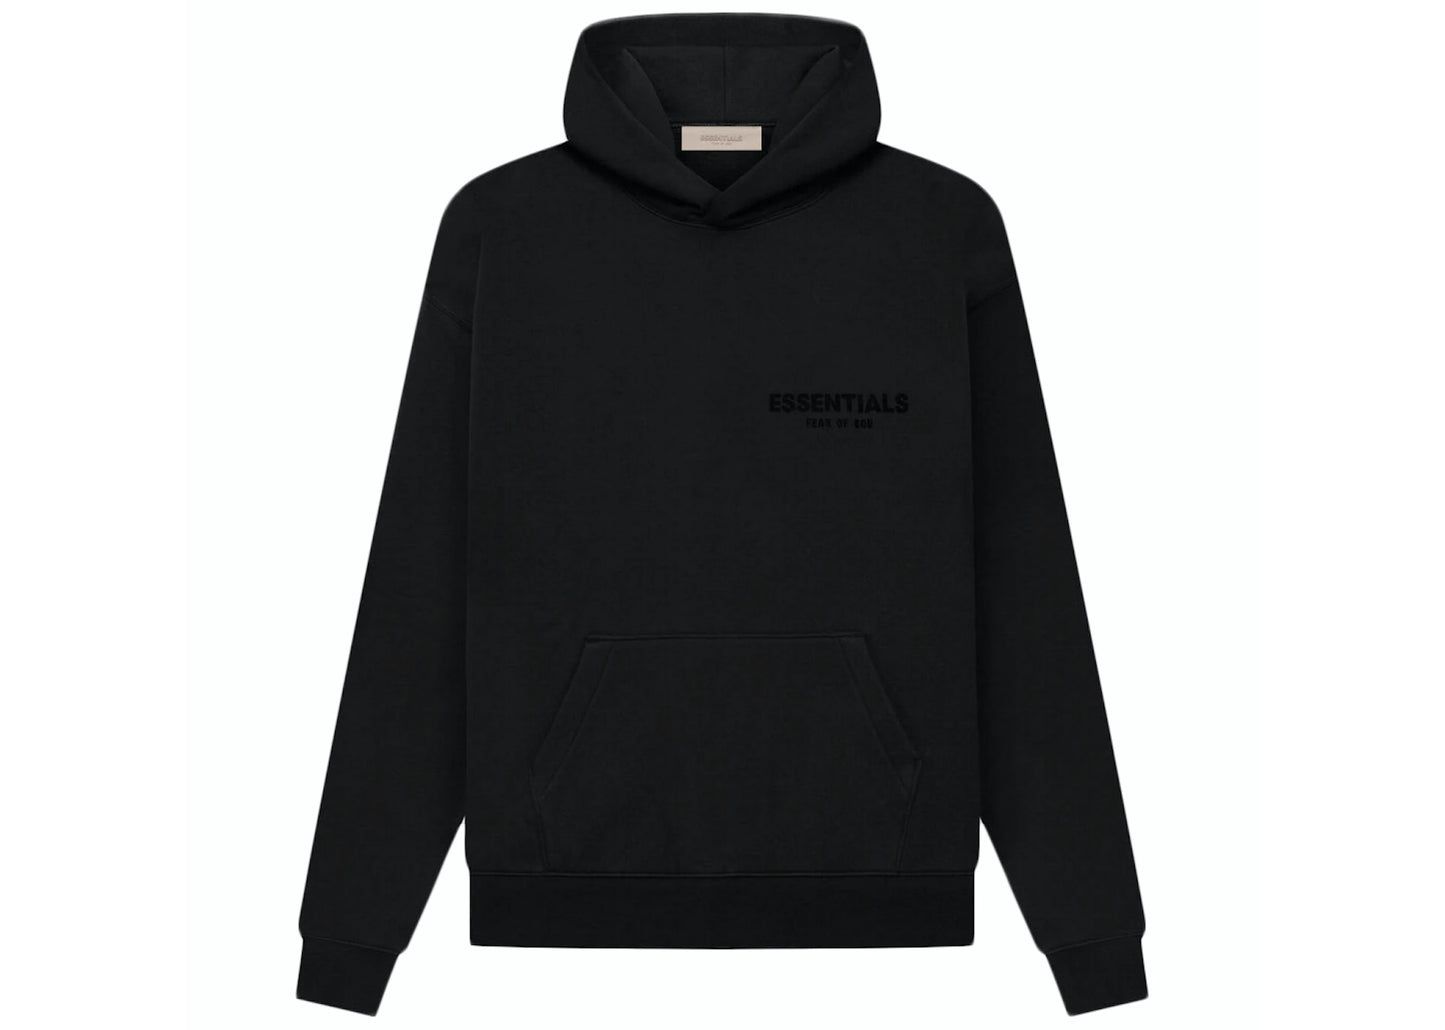 Fear of God Essentials Hoodie (SS22) Stretch Limo